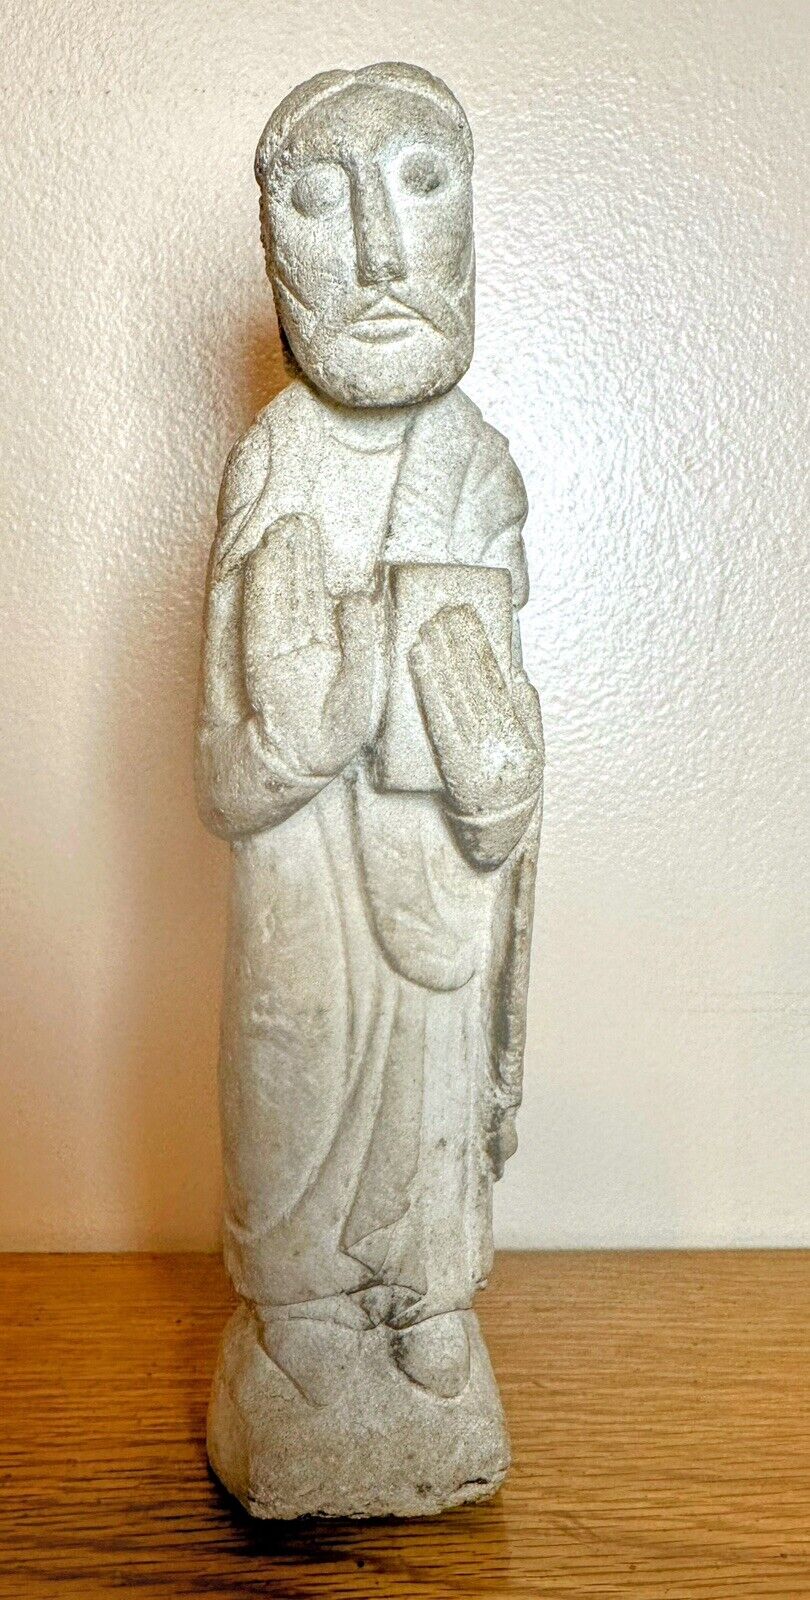 Rare Find Old Hebrew Religious Stone Figurine Sculpture Holding Bible/Book